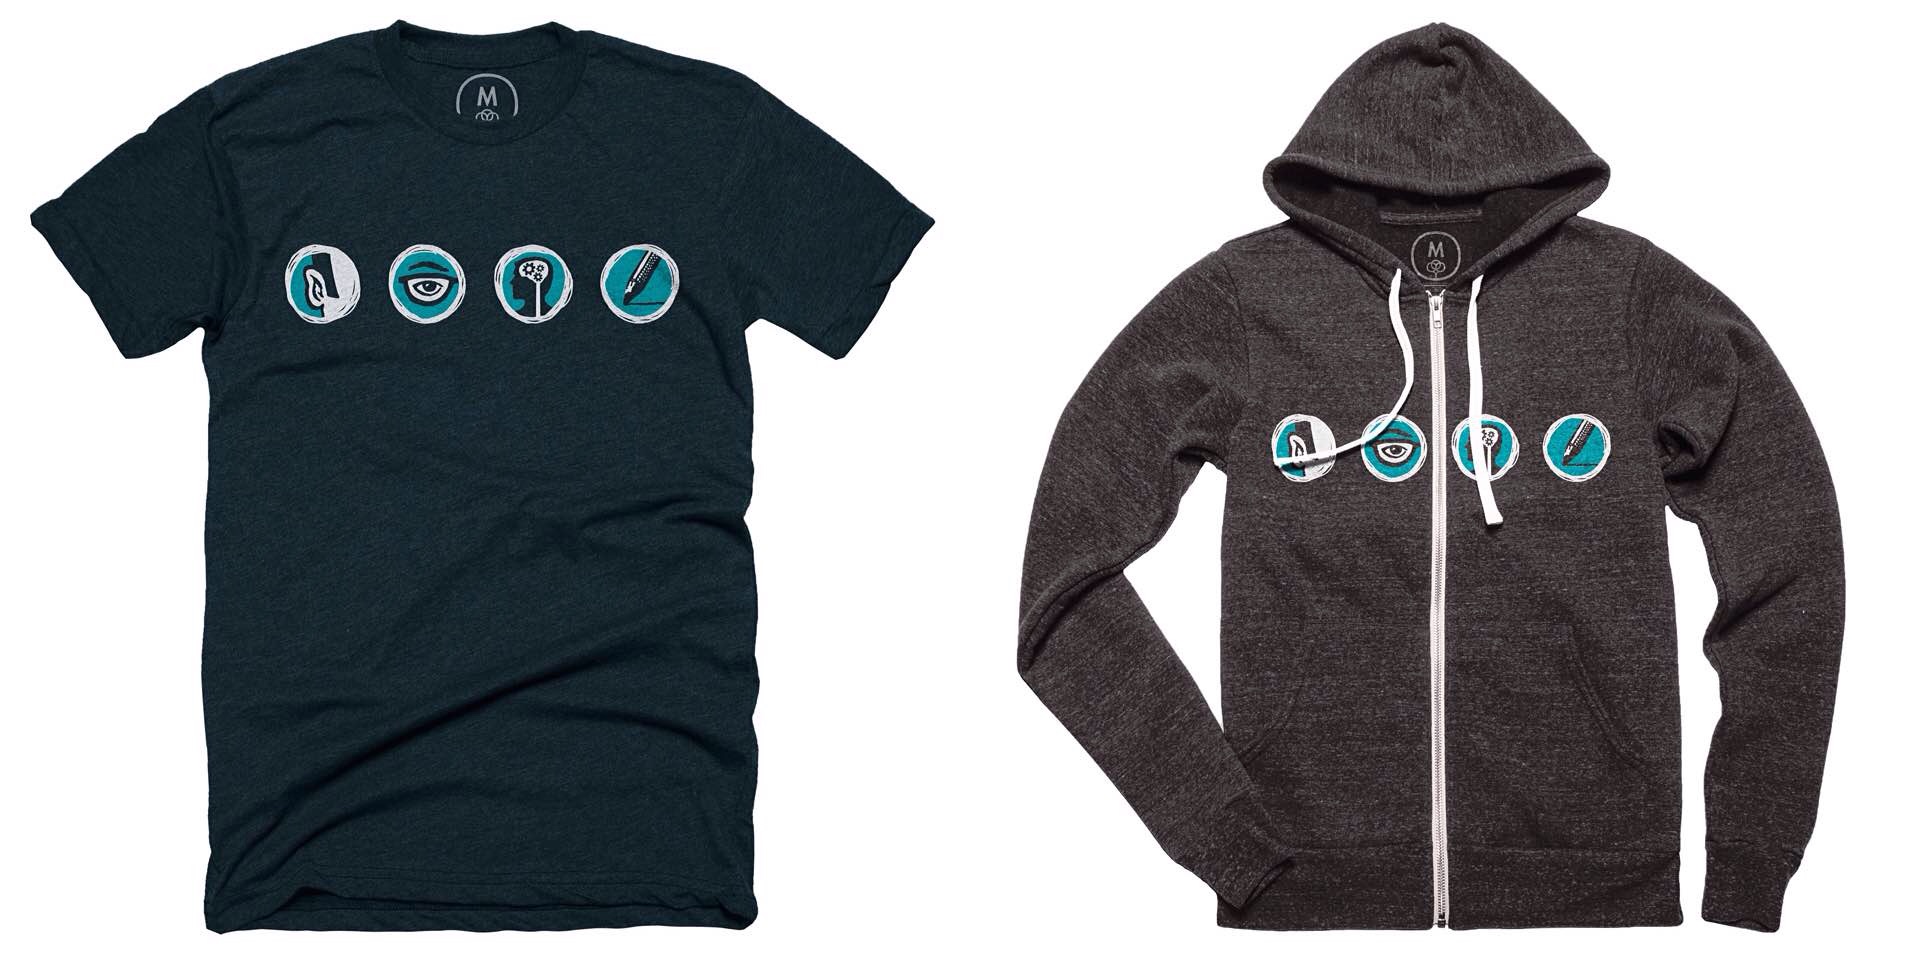 sketchnote-icon-t-shirts-and-hoodie